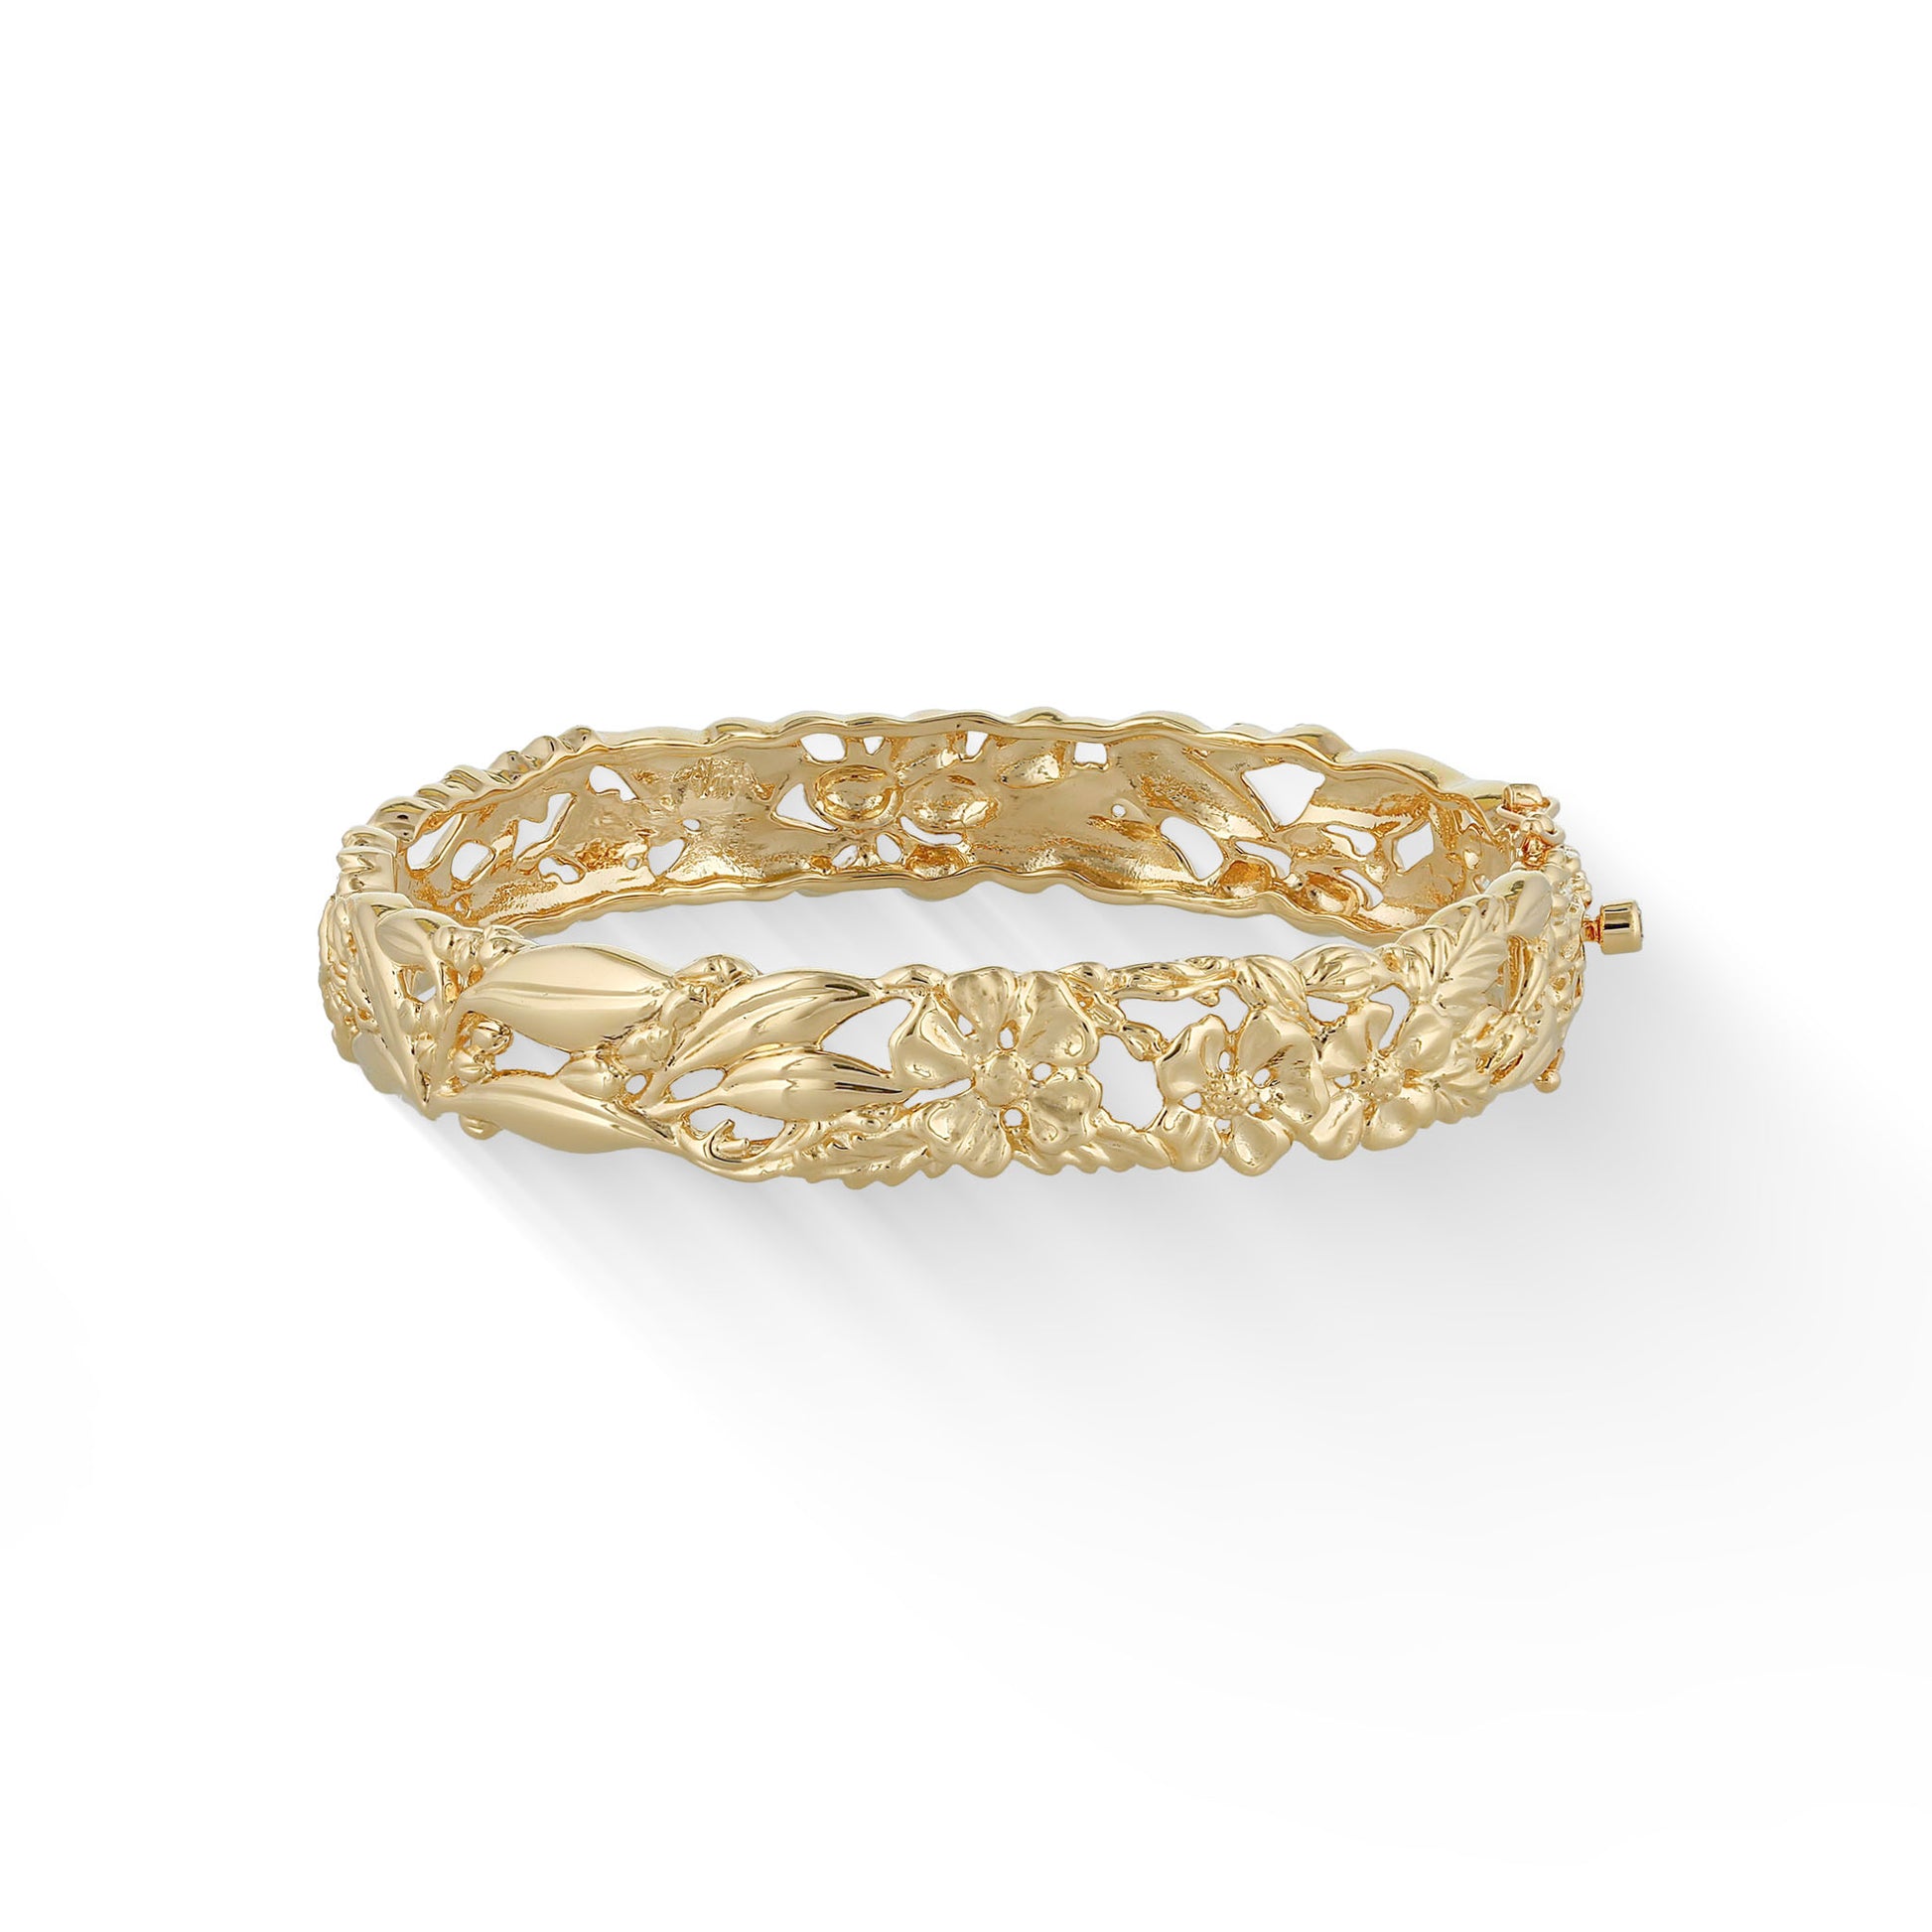 41516 - 14K Yellow Gold - Flowers of the Islands Hinged Bangle